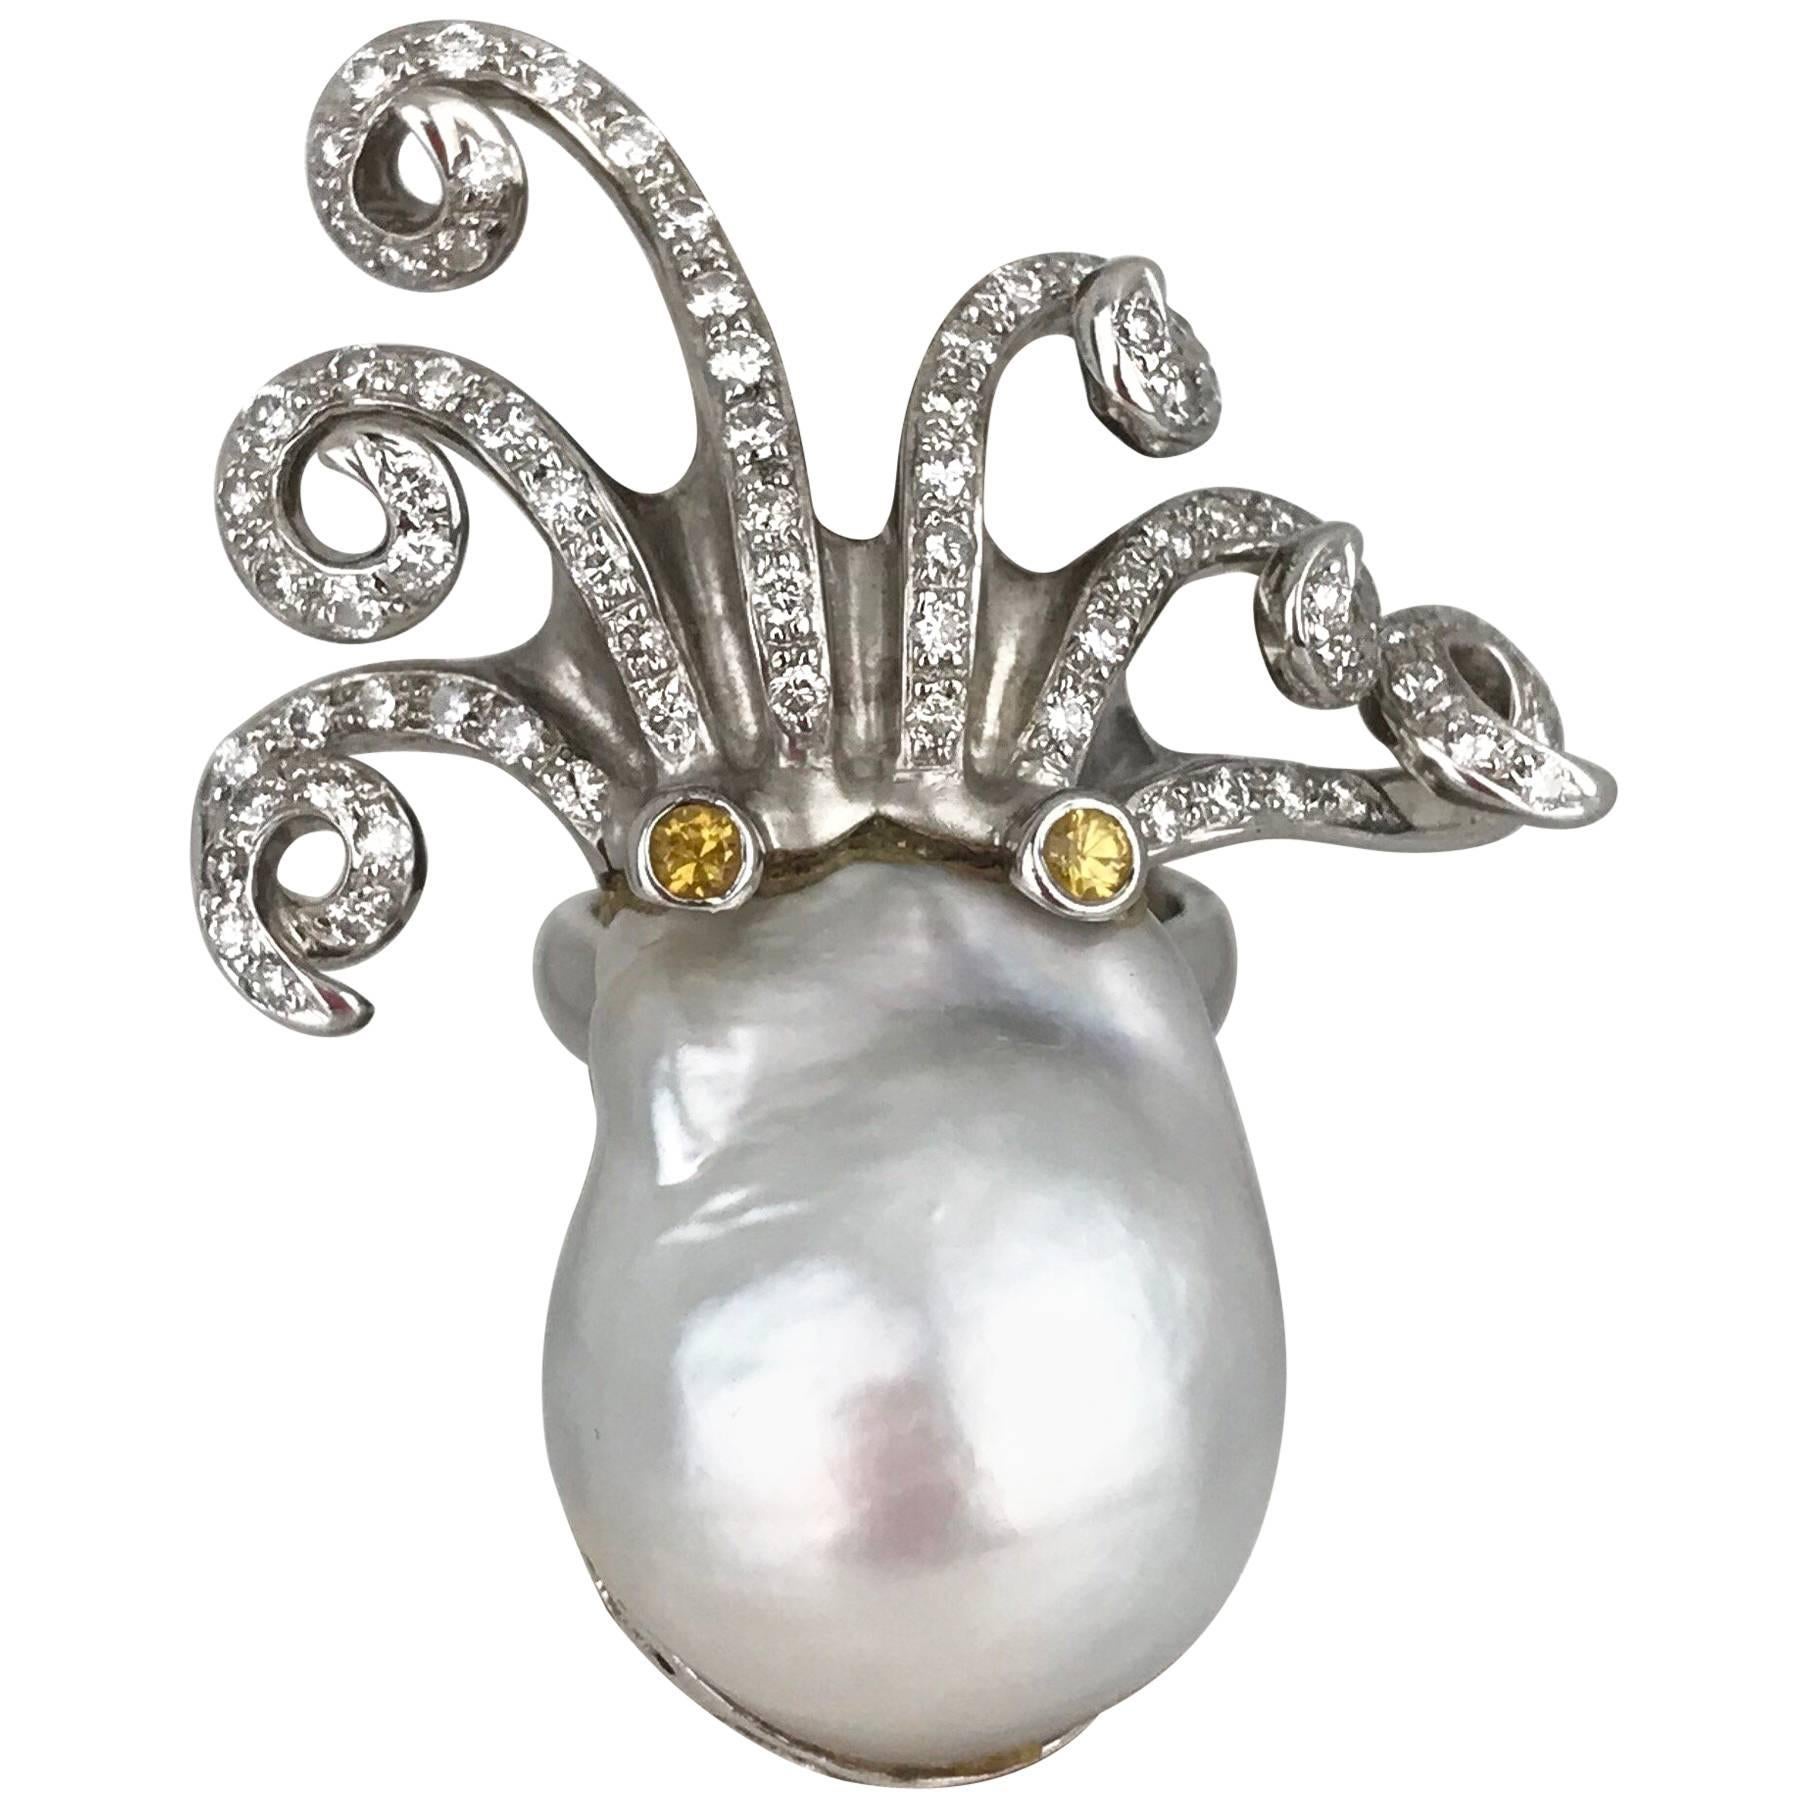 Octopus, 18 Karat Gold with a Pearl, Hallmark EJ, Retro Ring For Sale